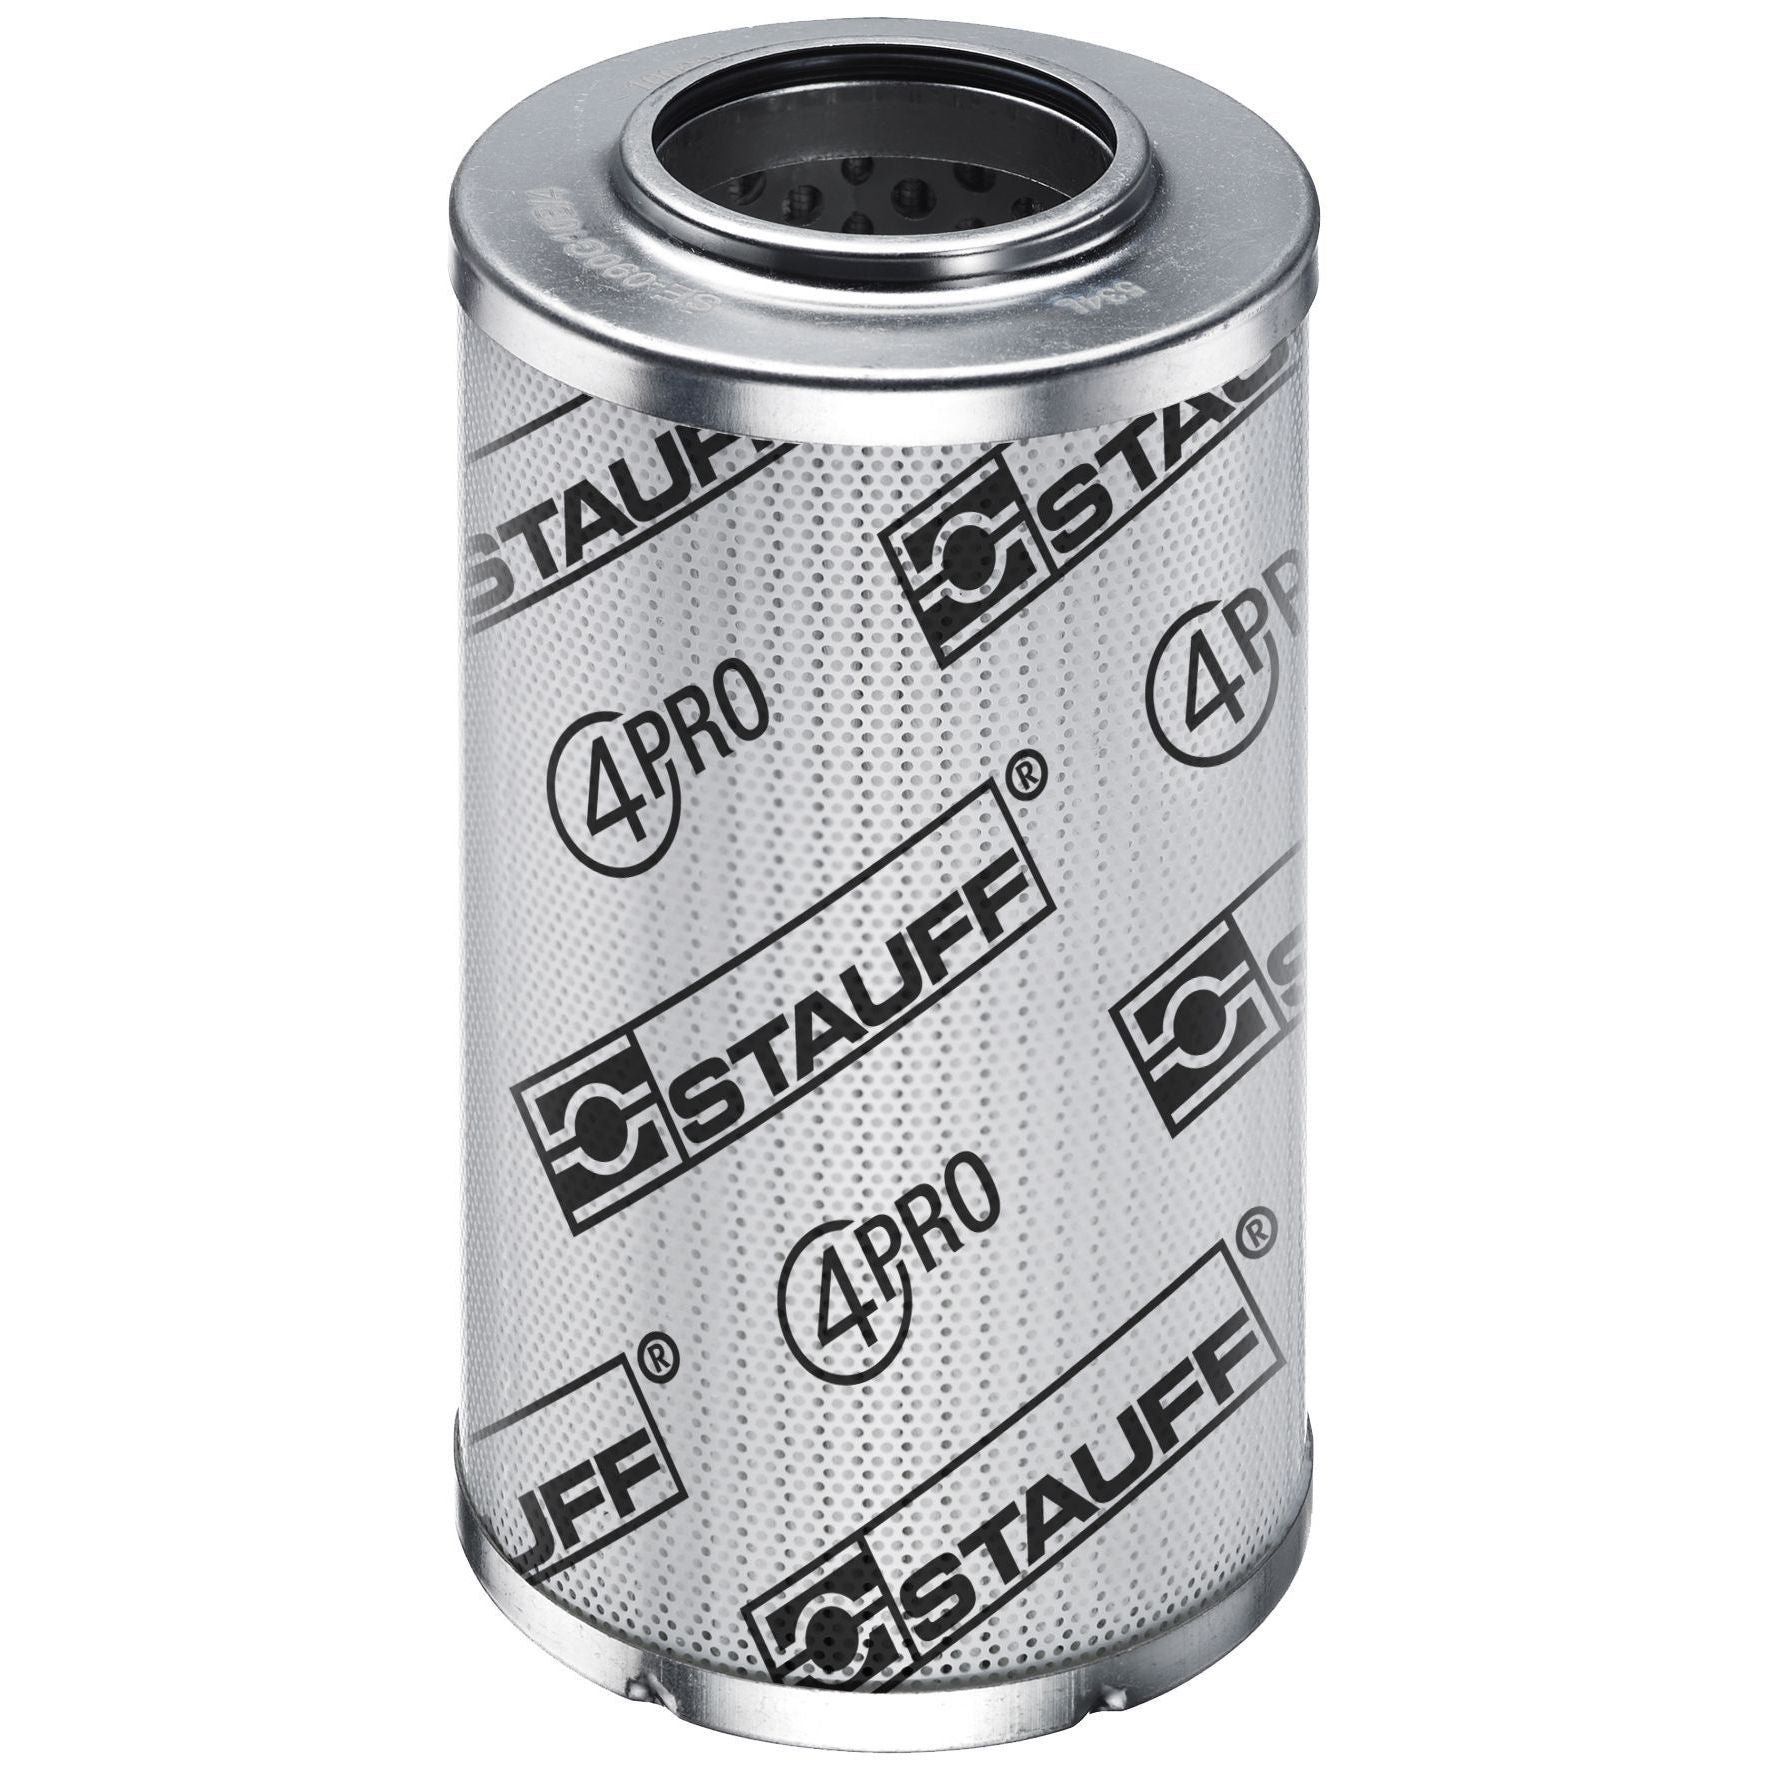 SE-160-H-03-E/4 : Stauff SF-160 Series Filter Element, 3 Micron, Synthetic, 3045psi Collapse Differential, EPDM Seals